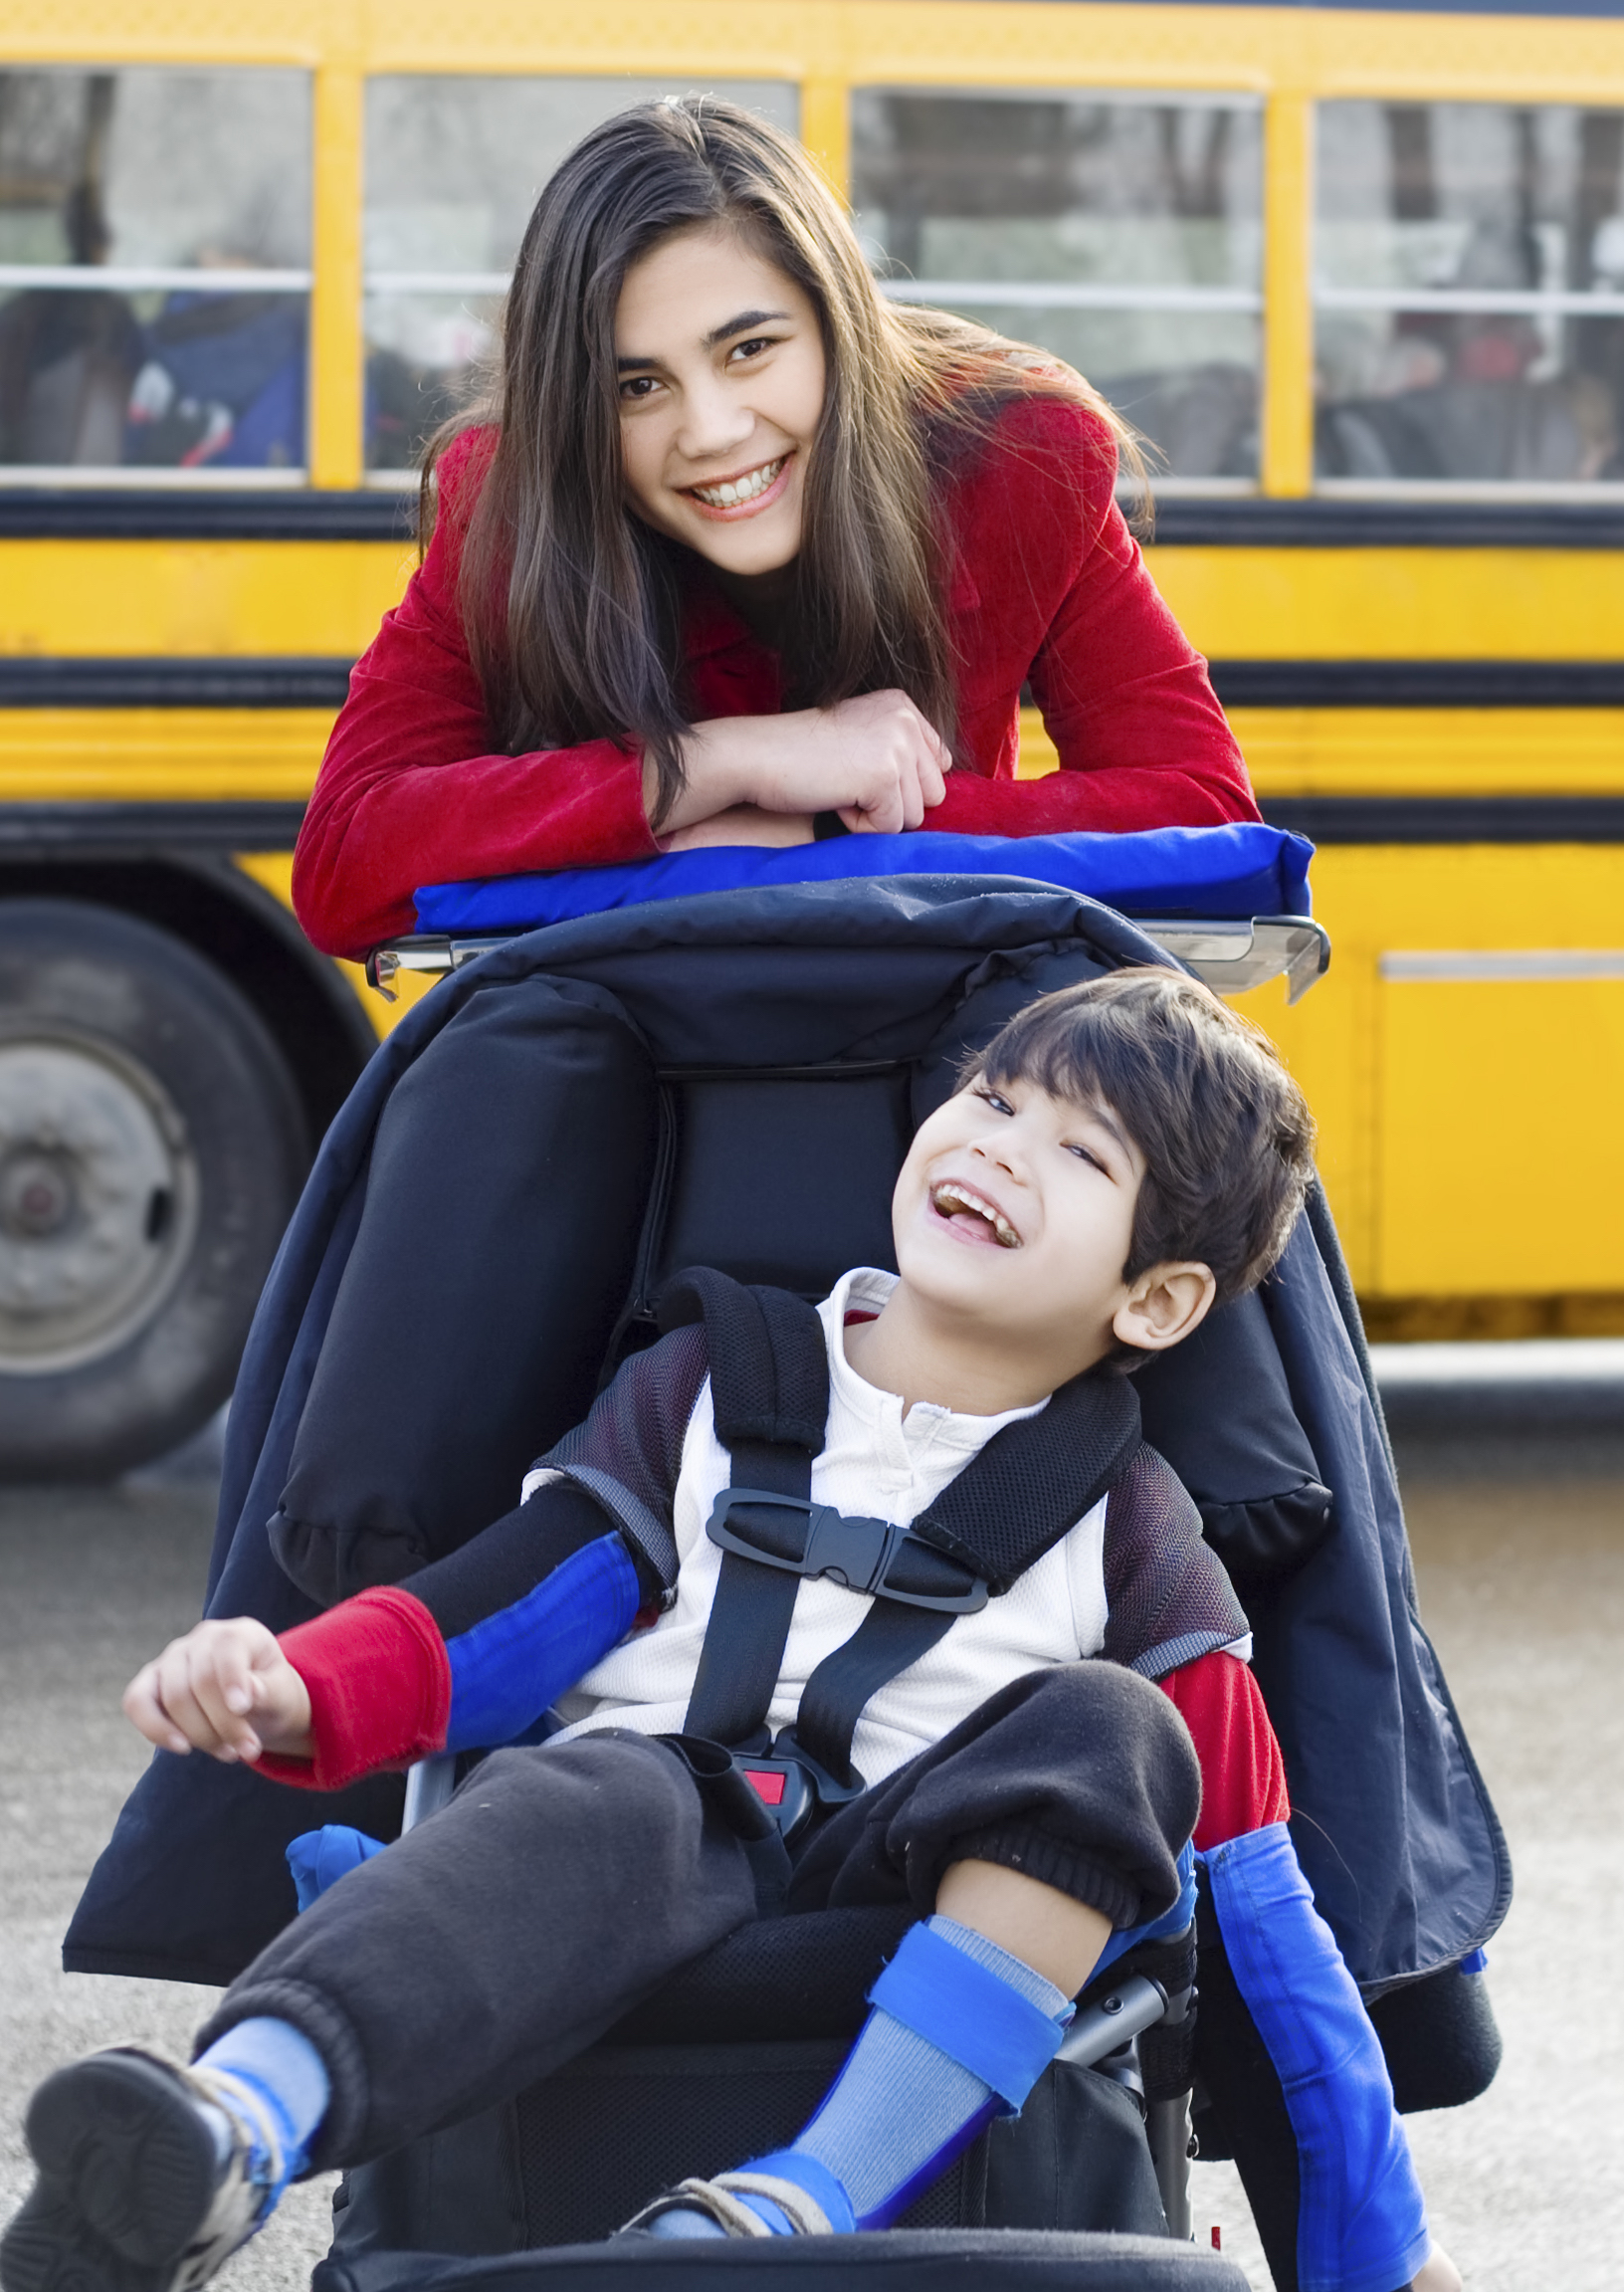 Smiling young student in wheelchair with teen by school bus. 